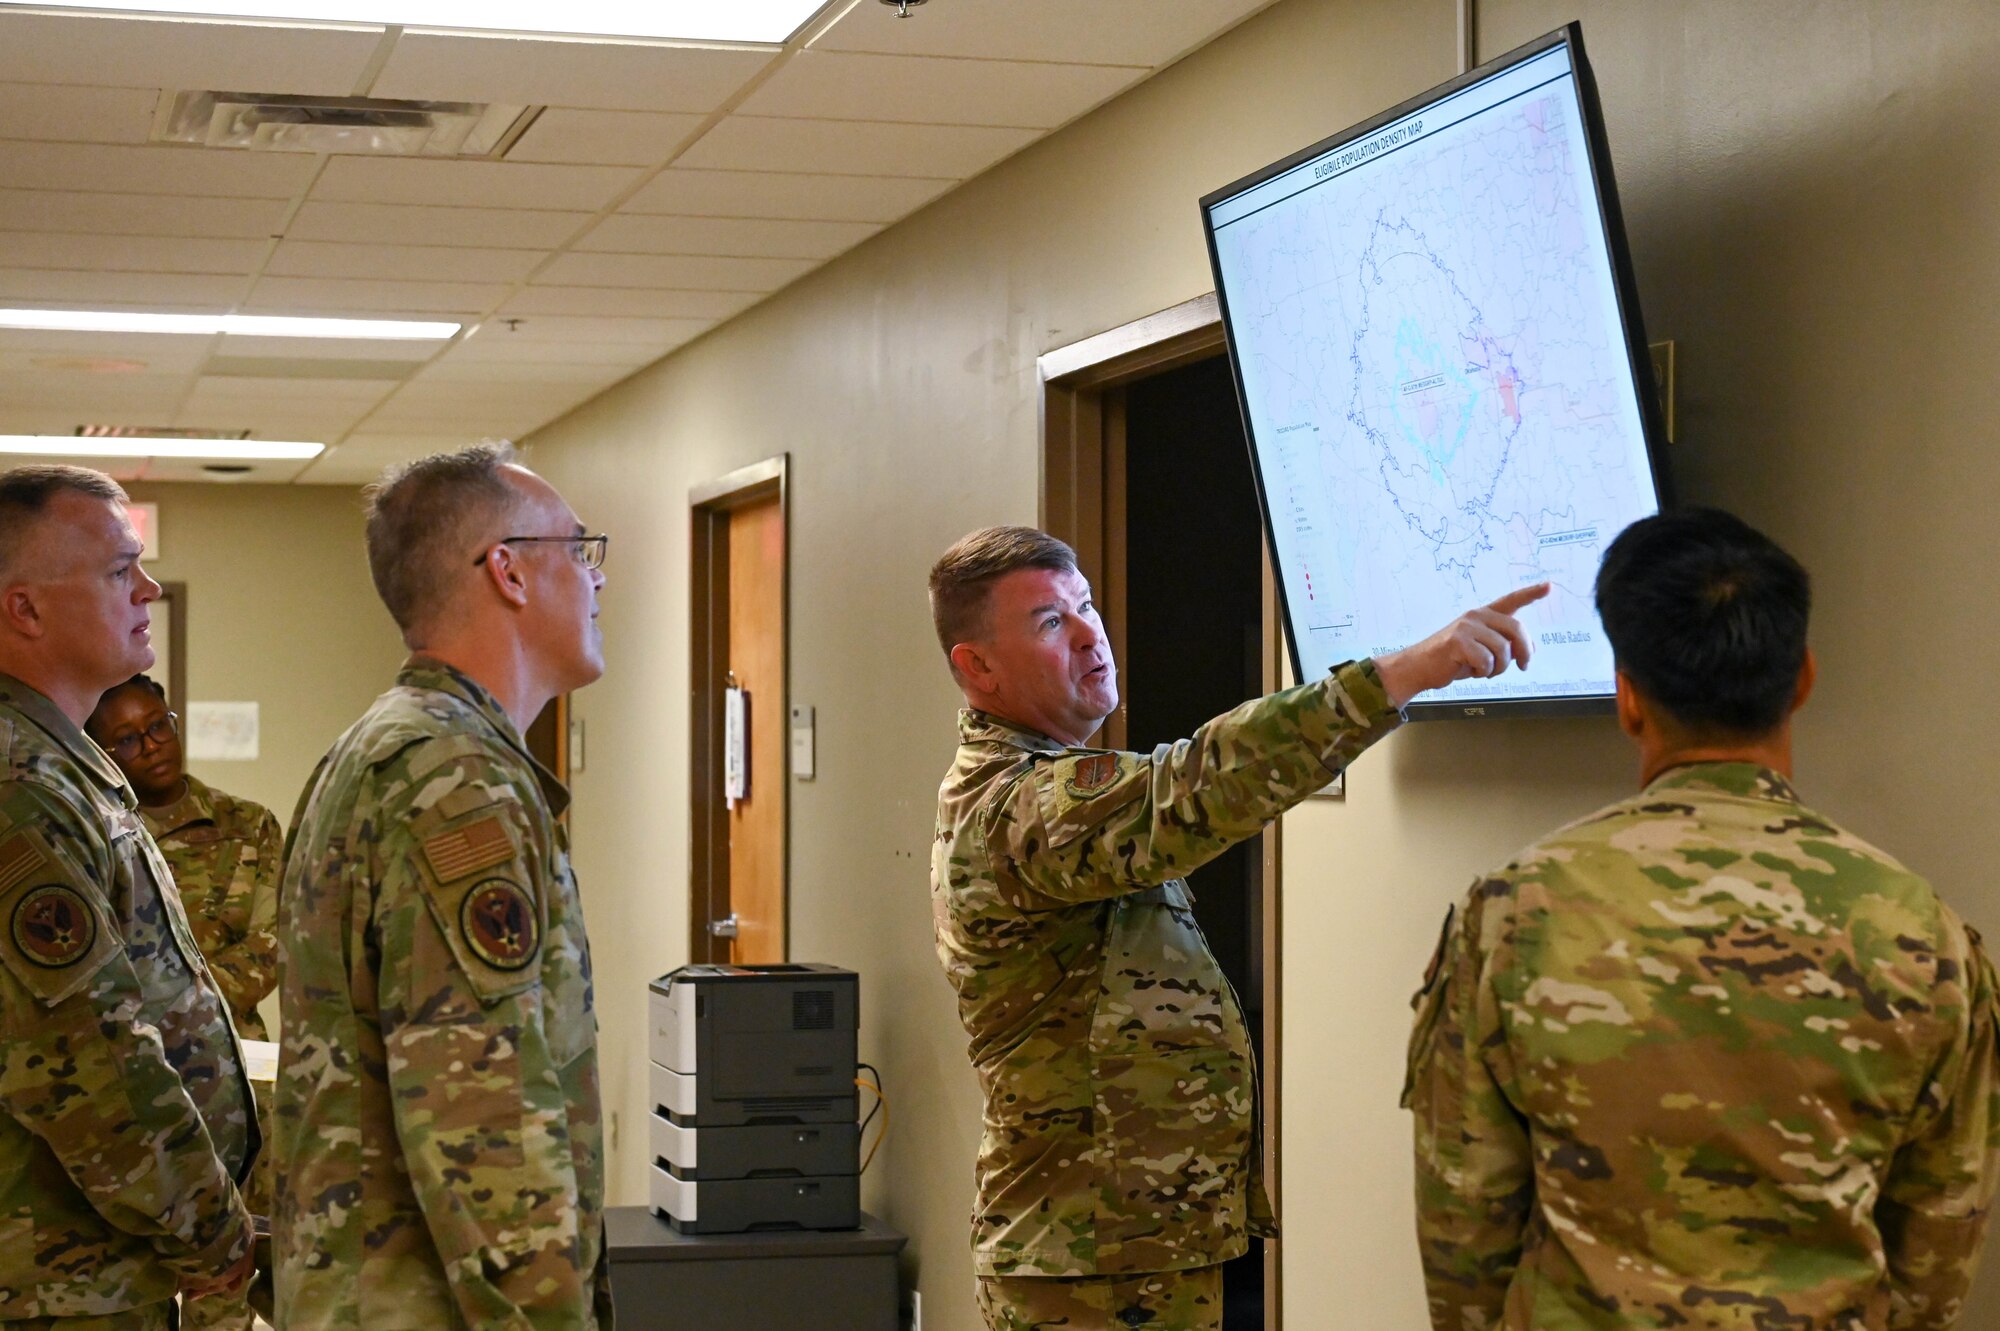 From right, U.S. Air Force Col. Daniel Roberts, 97th Medical Group commander, shows Col. Christopher Grussendorf, Air Education and Training Command (AETC) surgeon general, and Chief Master Sgt. Donald Cook, AETC chief of enlisted medical force, a digital map of Altus and surrounding areas during a tour of the medical group facility at Altus Air Force Base, Oklahoma, Sept. 13, 2023. Members of the medical group deliver patient-centered healthcare and are responsible for ensuring wartime readiness and the health of Airmen and their families. (U.S. Air Force photo by Airman 1st Class Heidi Bucins)